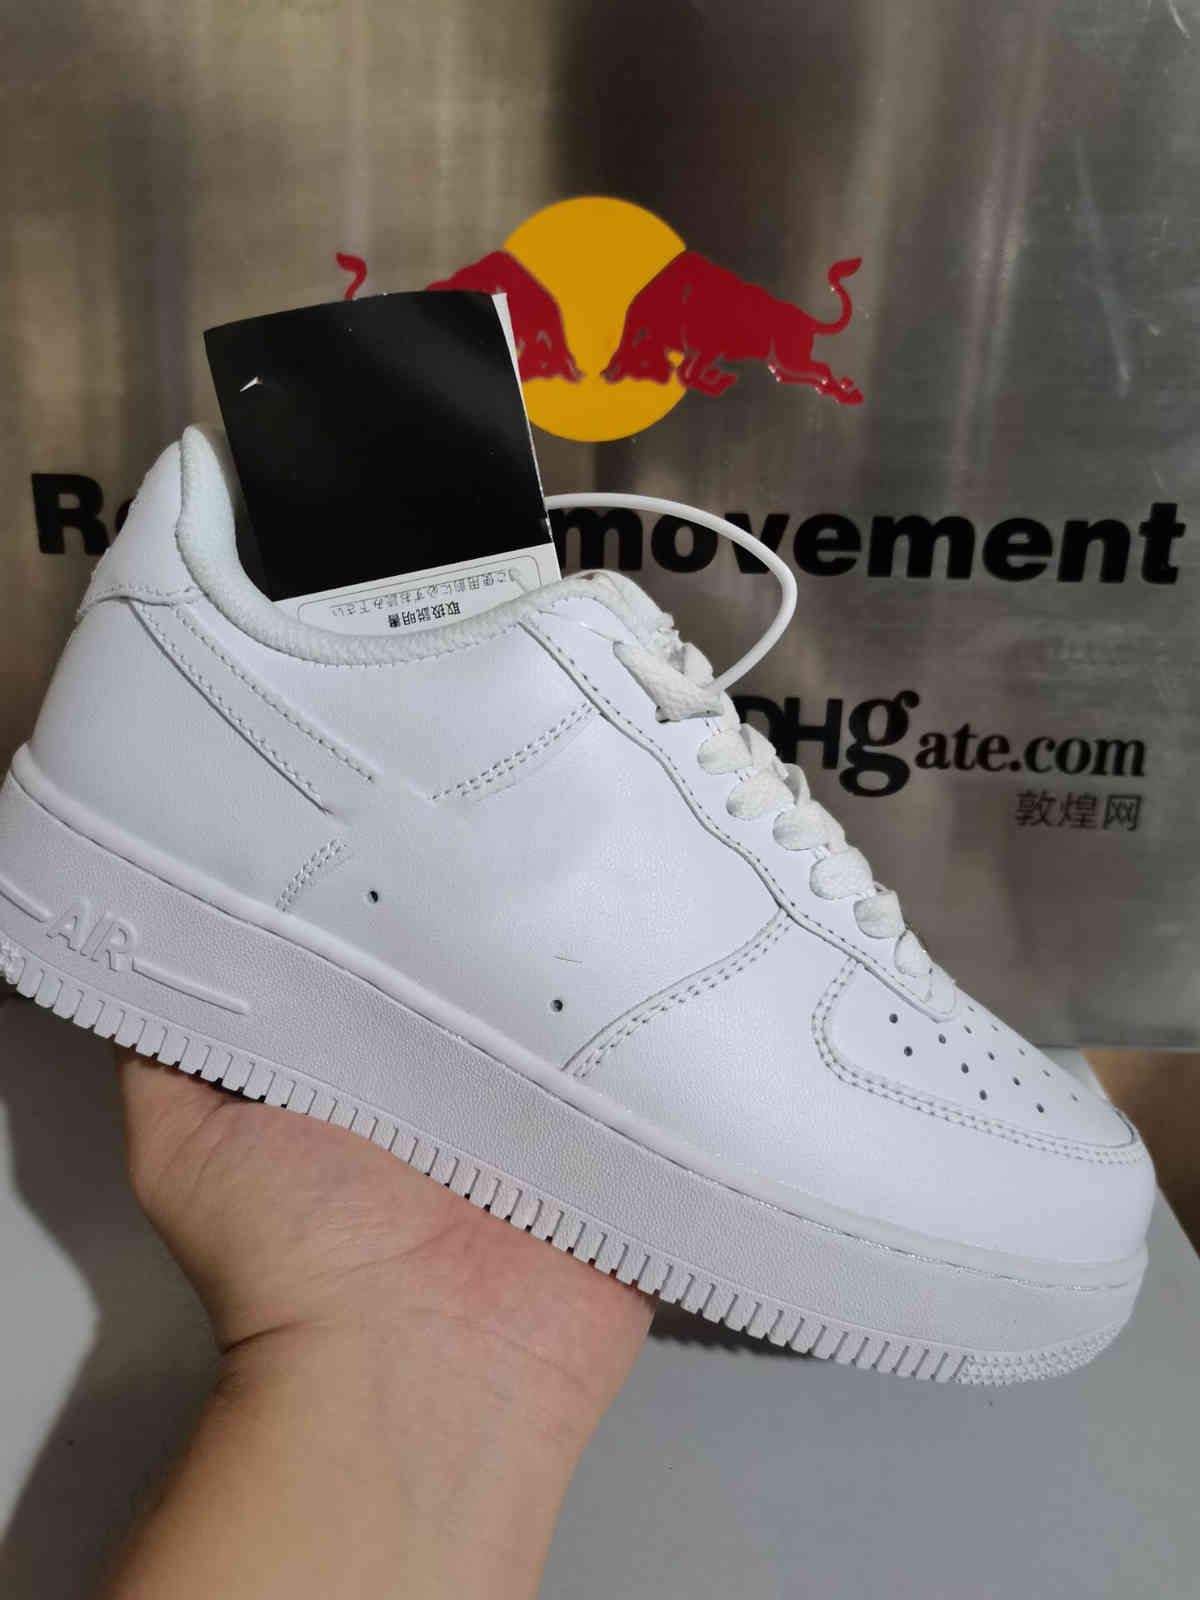 

Quality Men Low Skateboard Cheap One 1 Knit Euro Air High Women Forces All White Black Red Discount Trainer Designer Casual Shoes, Box